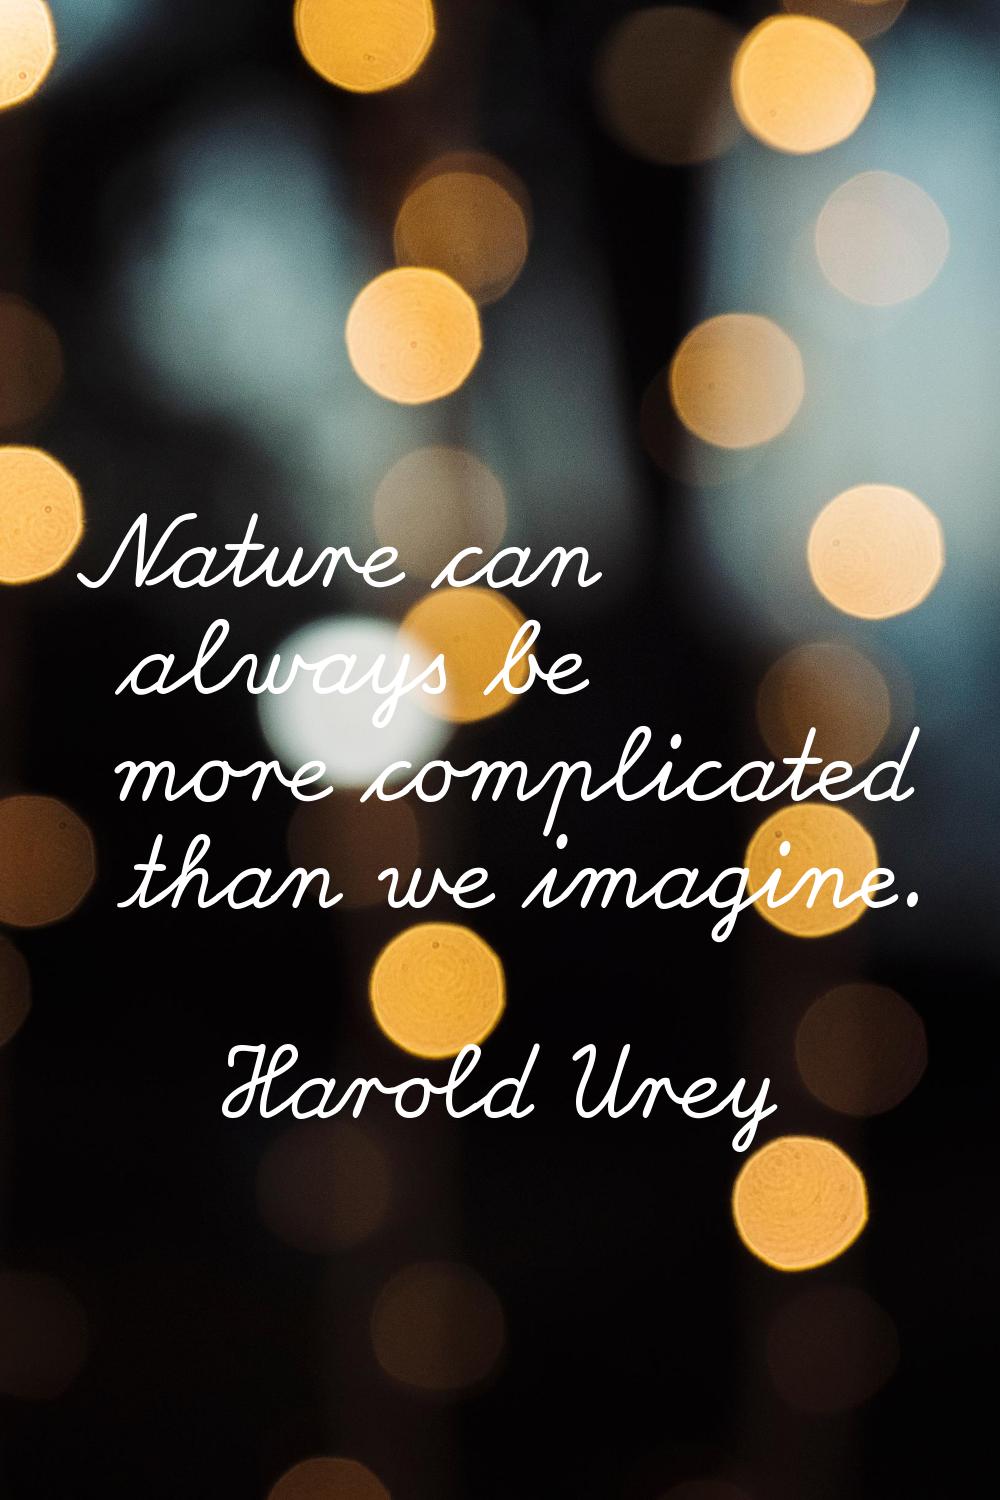 Nature can always be more complicated than we imagine.